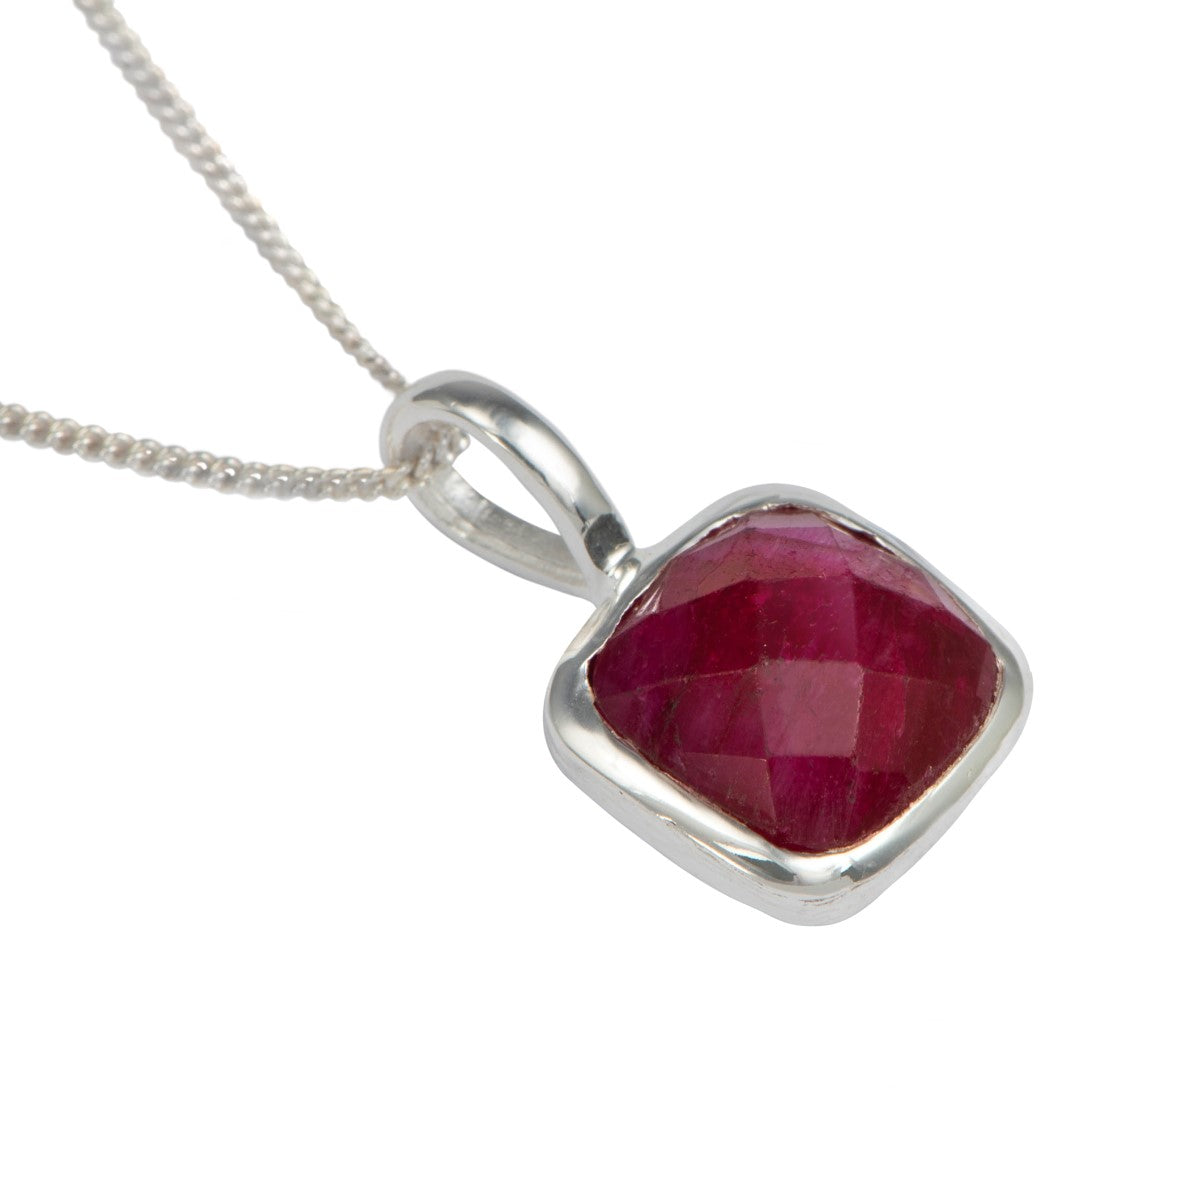 Sterling Silver Pendant Necklace with a Faceted Square Gemstone - Ruby Quartz